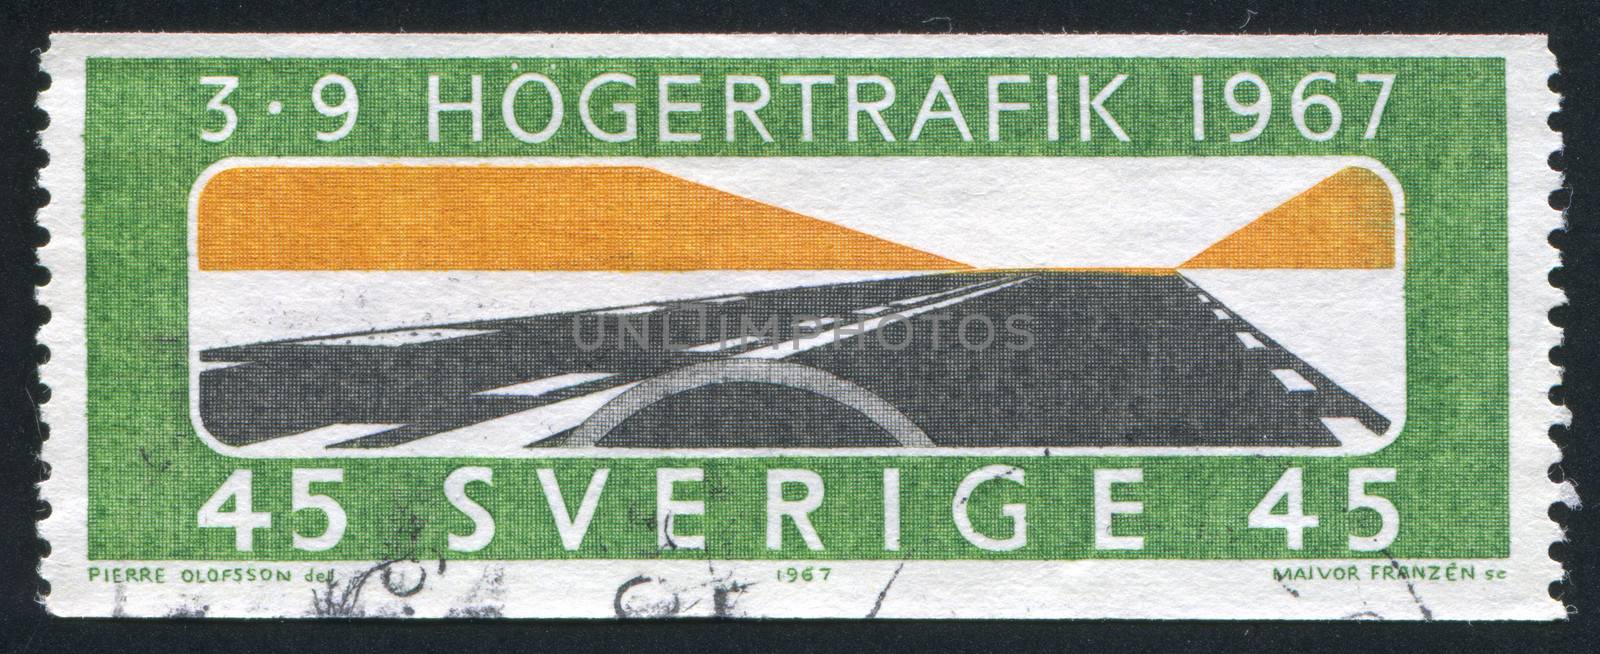 SWEDEN - CIRCA 1967: stamp printed by Sweden, shows Right hand Driving as Seen Through Windshield, circa 1967